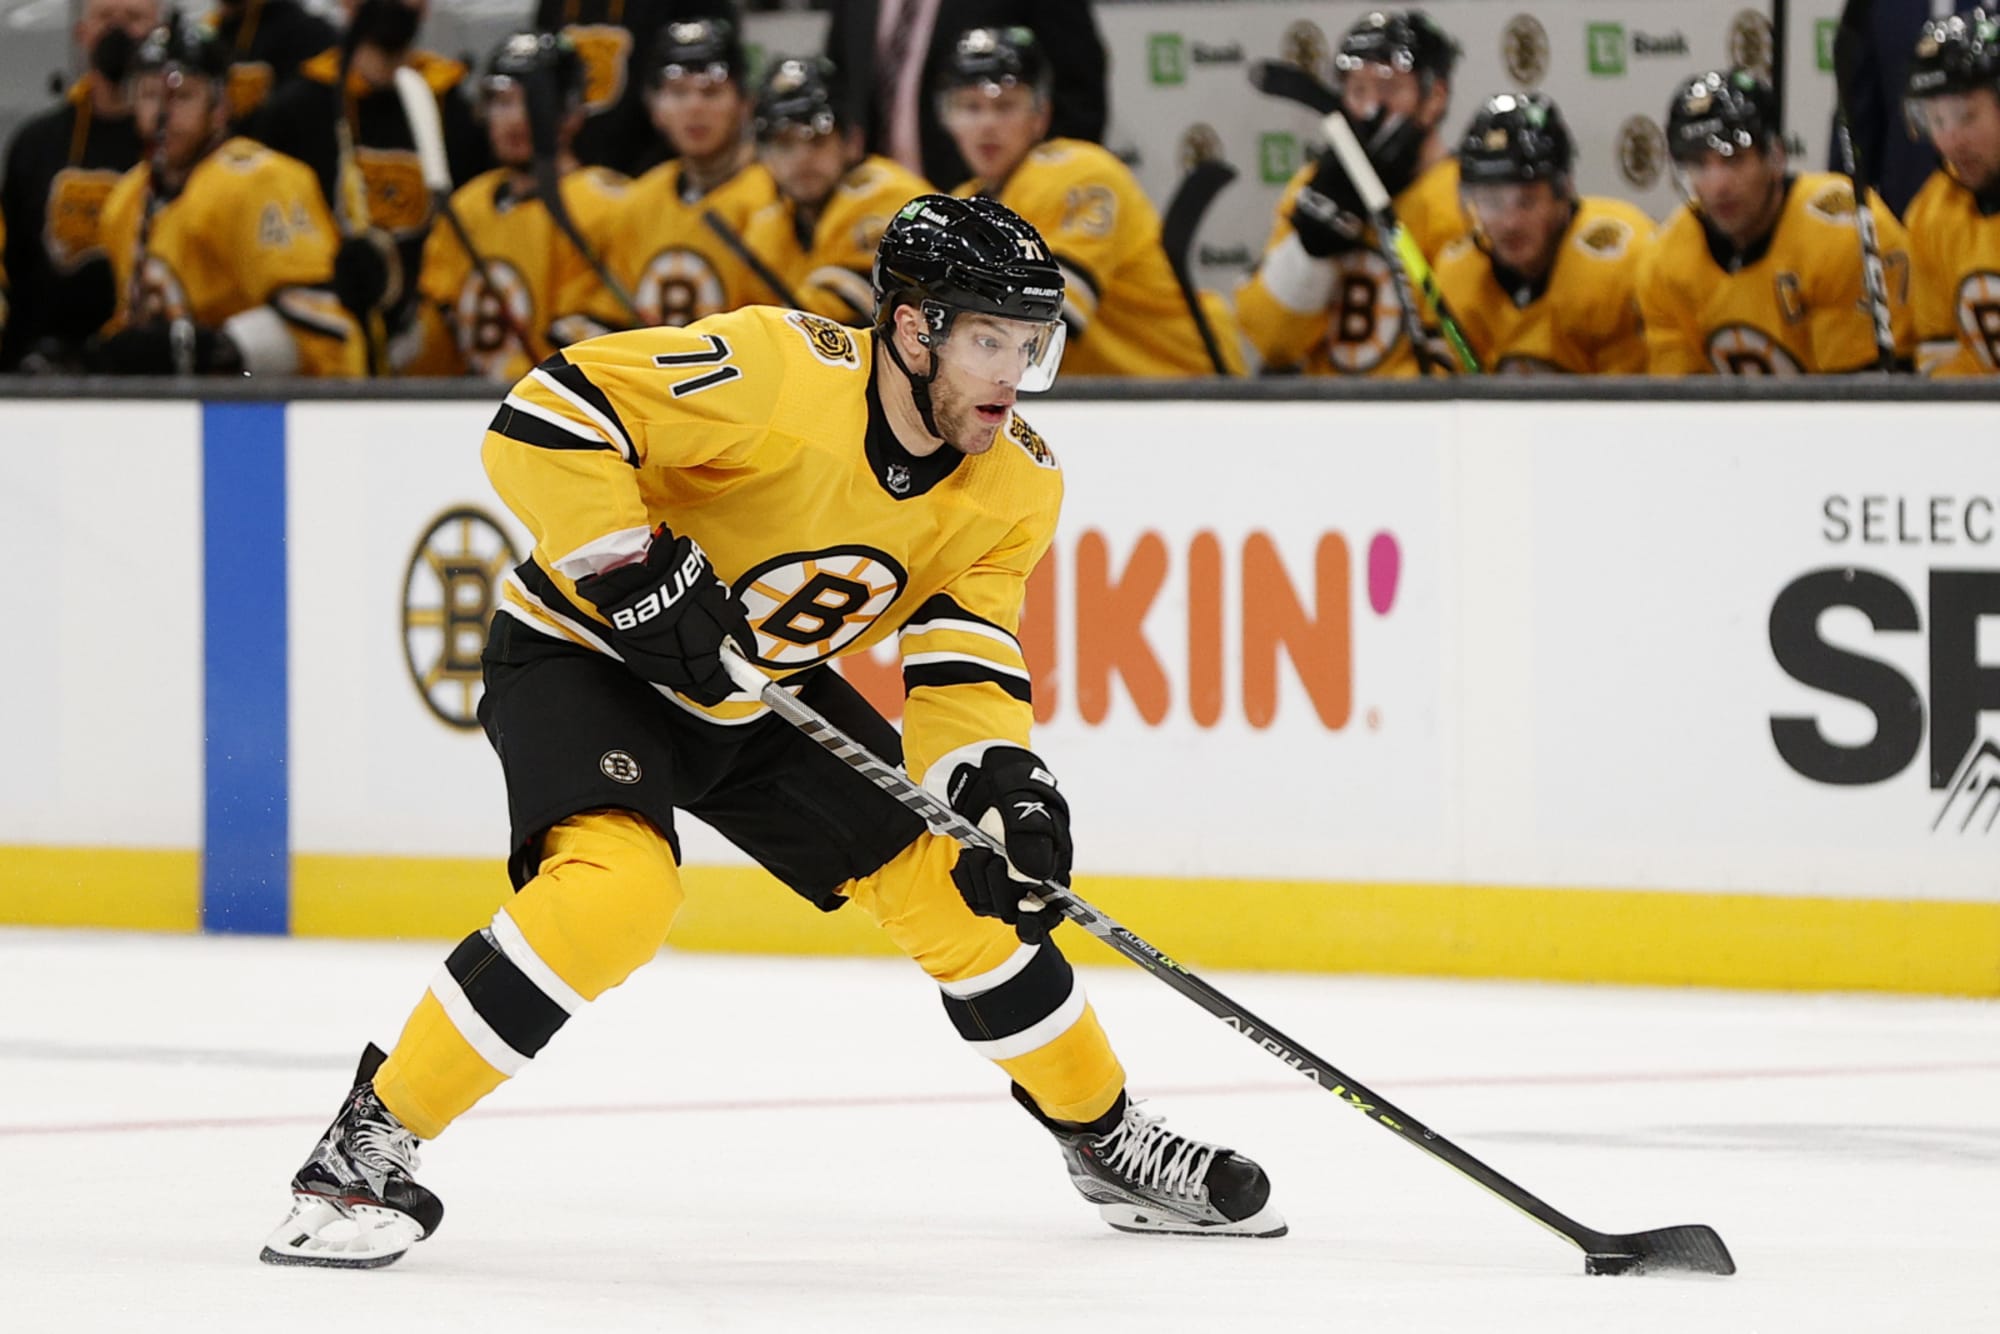 Boston Bruins: Why Taylor Hall is unlikely to end up in Bruins colors